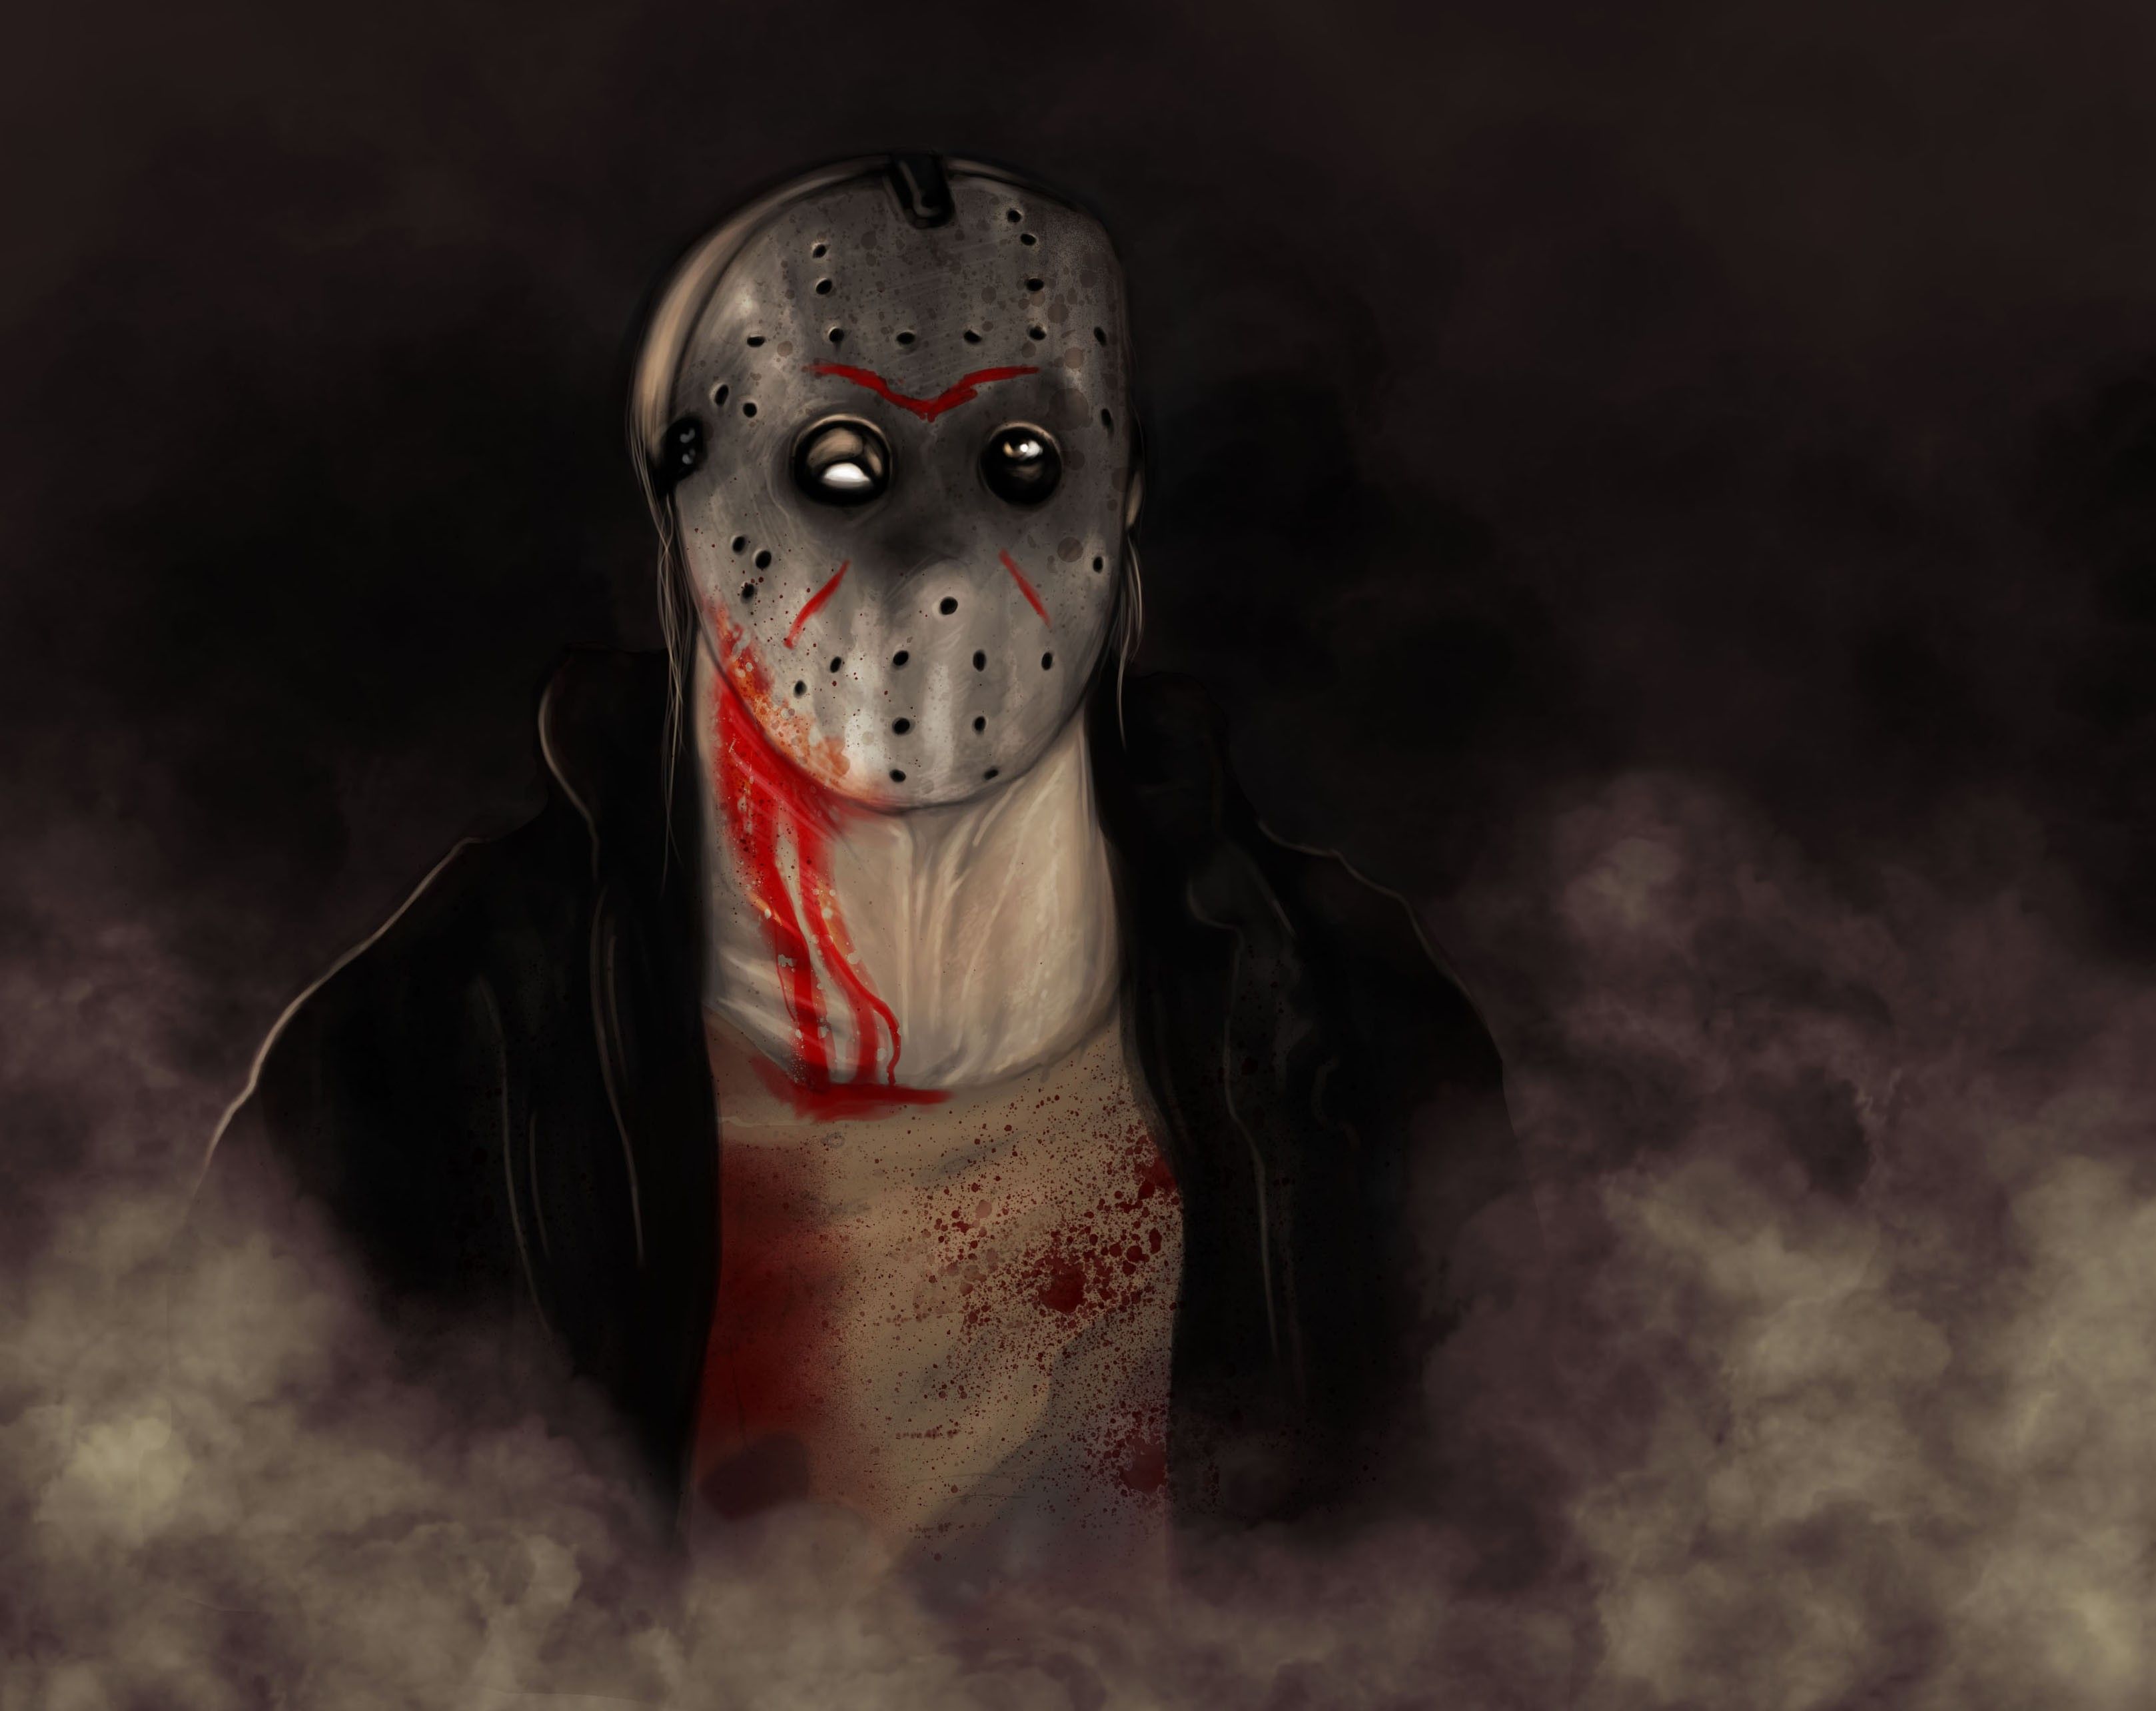 Free download Jason Voorhees Wallpaper High Quality Download